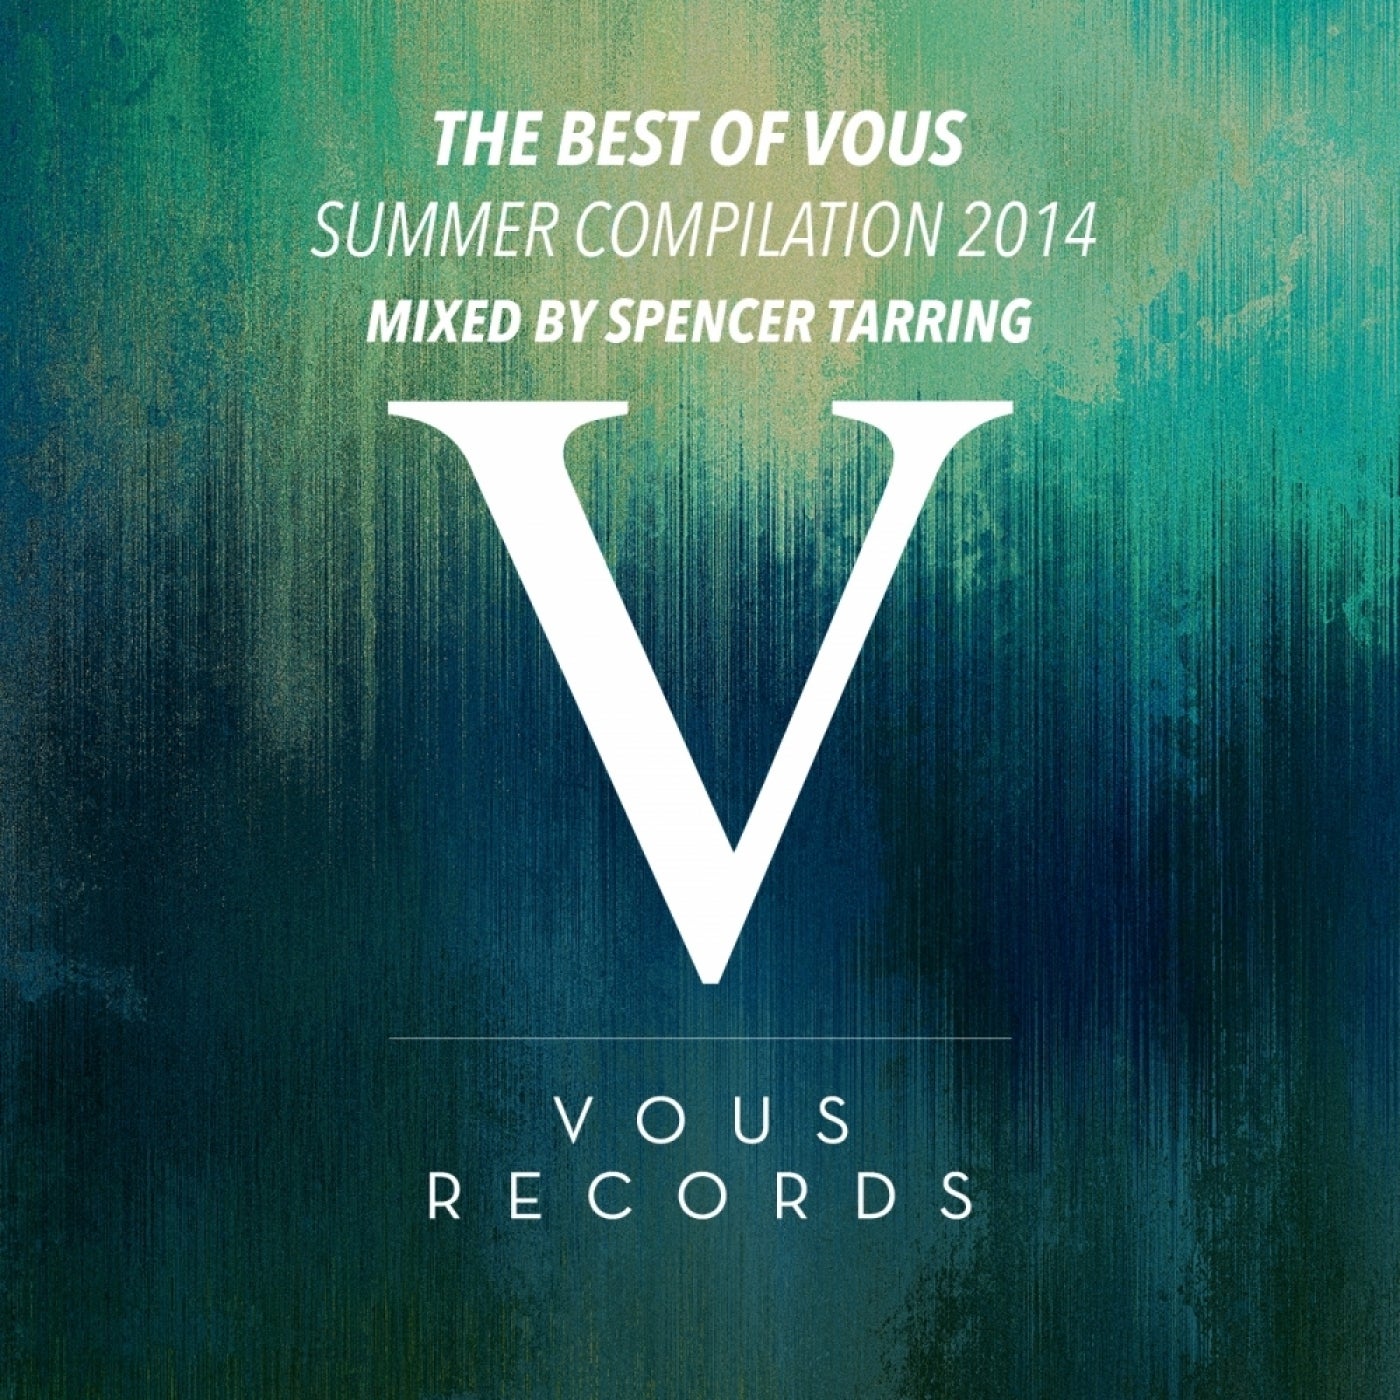 The Best Of Vous: Summer Compilation 2014